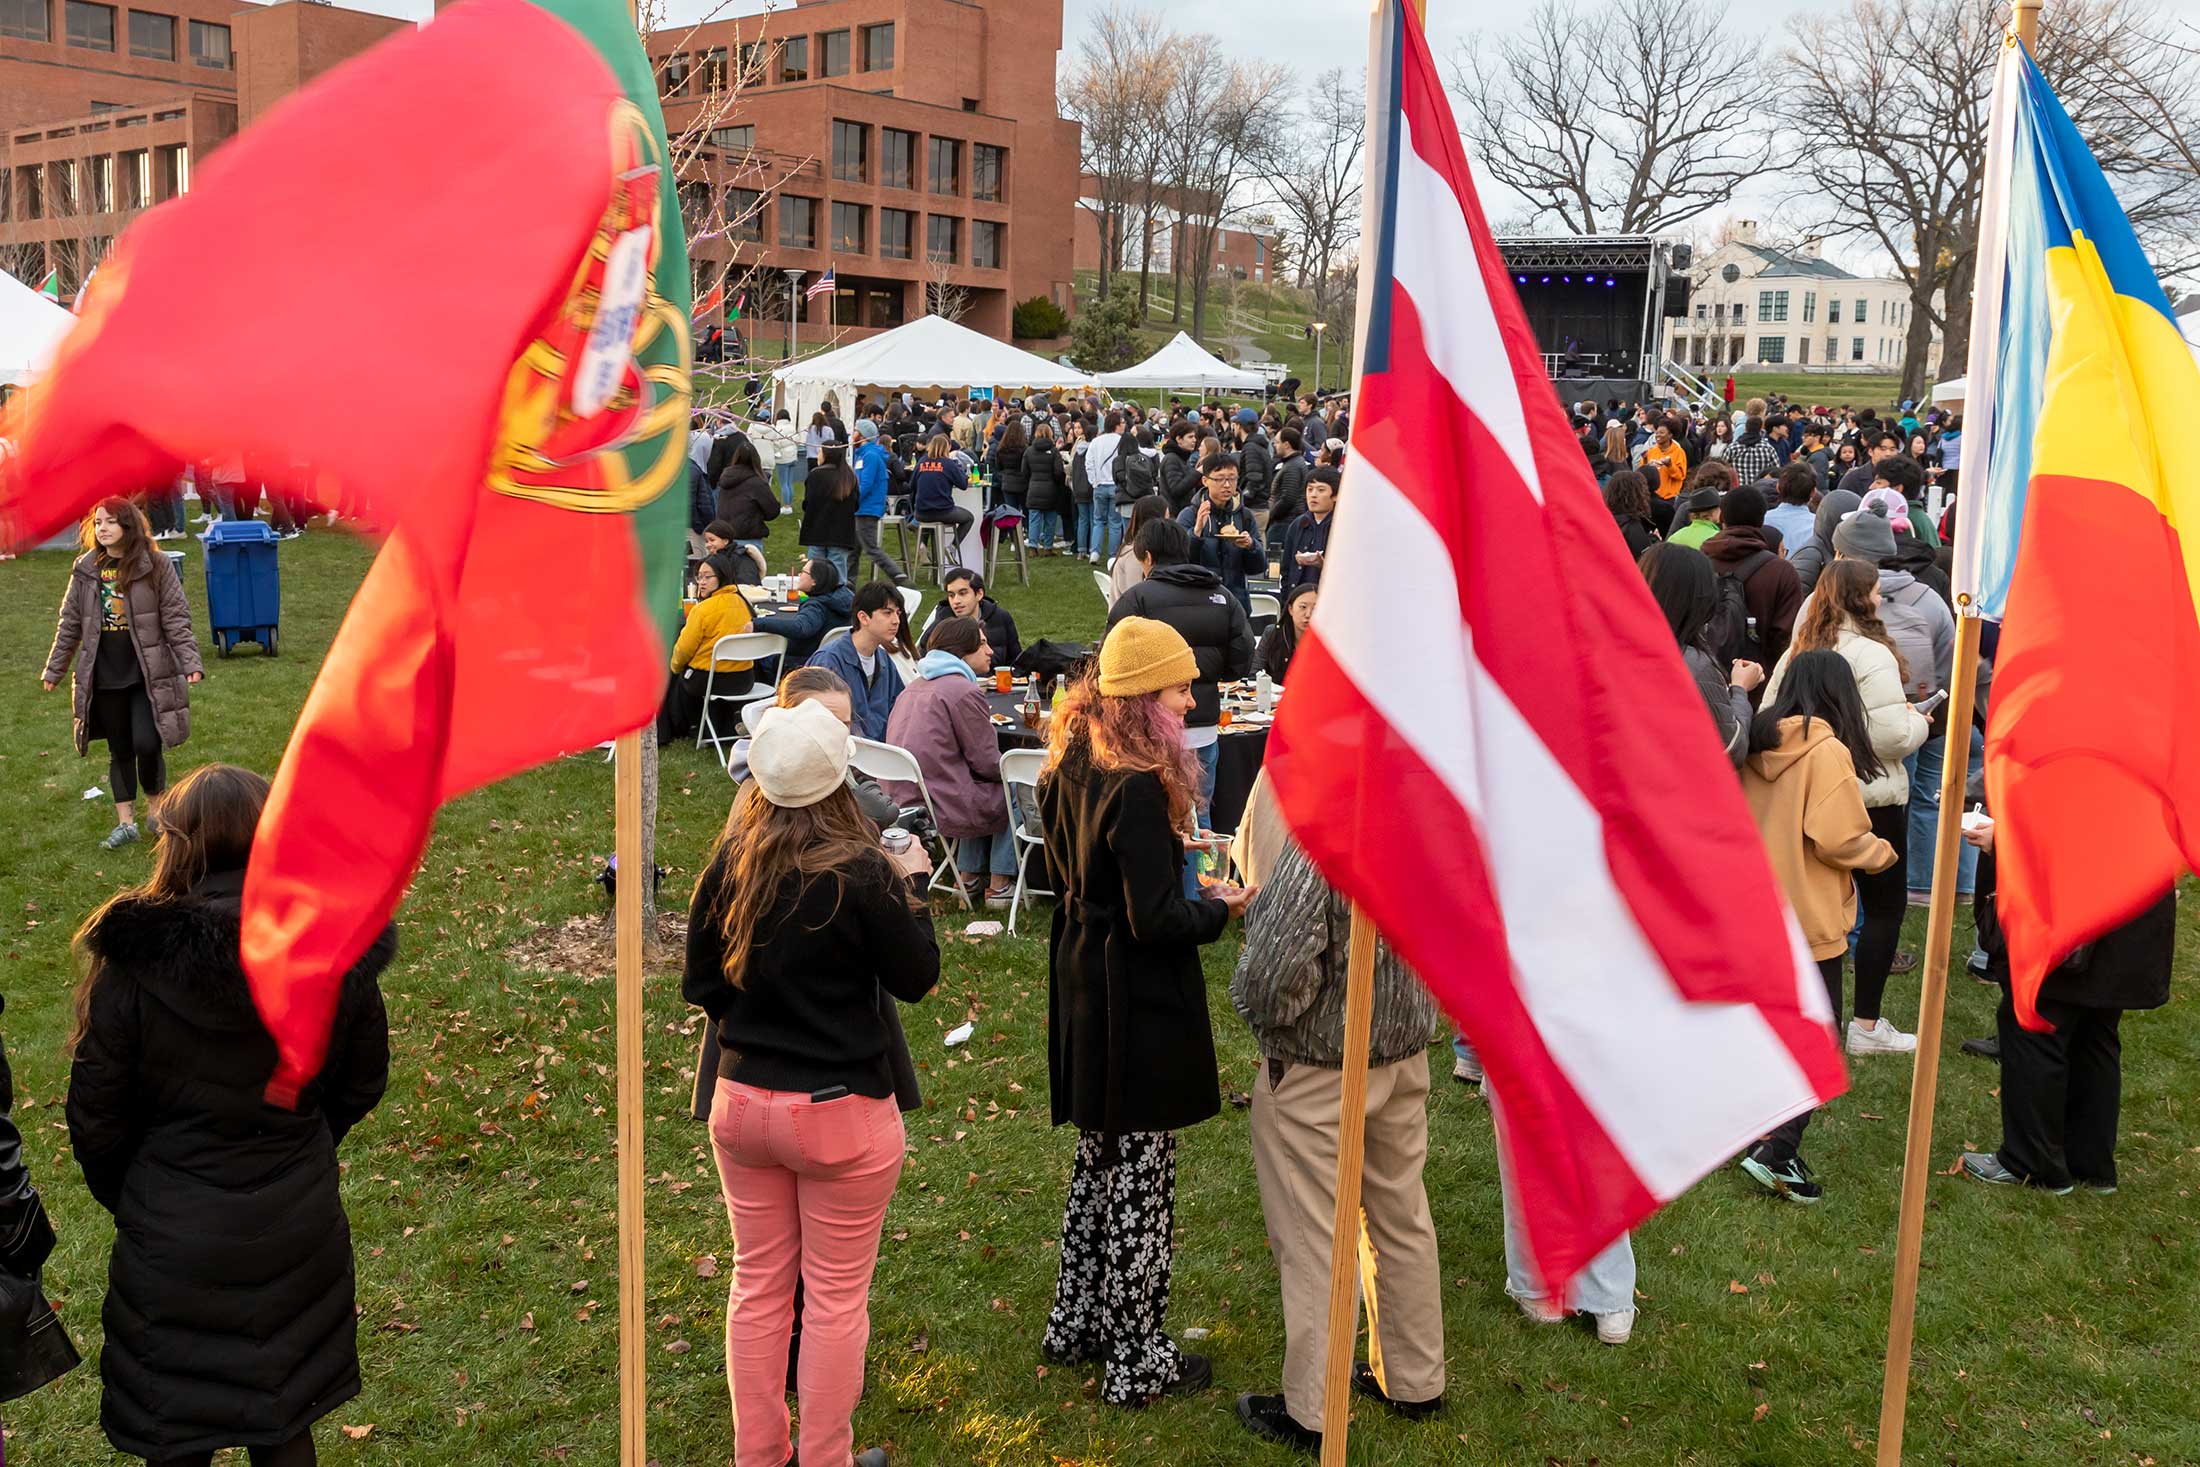 Students gather on the Amherst College campus. International flags are displayed in the forebround.